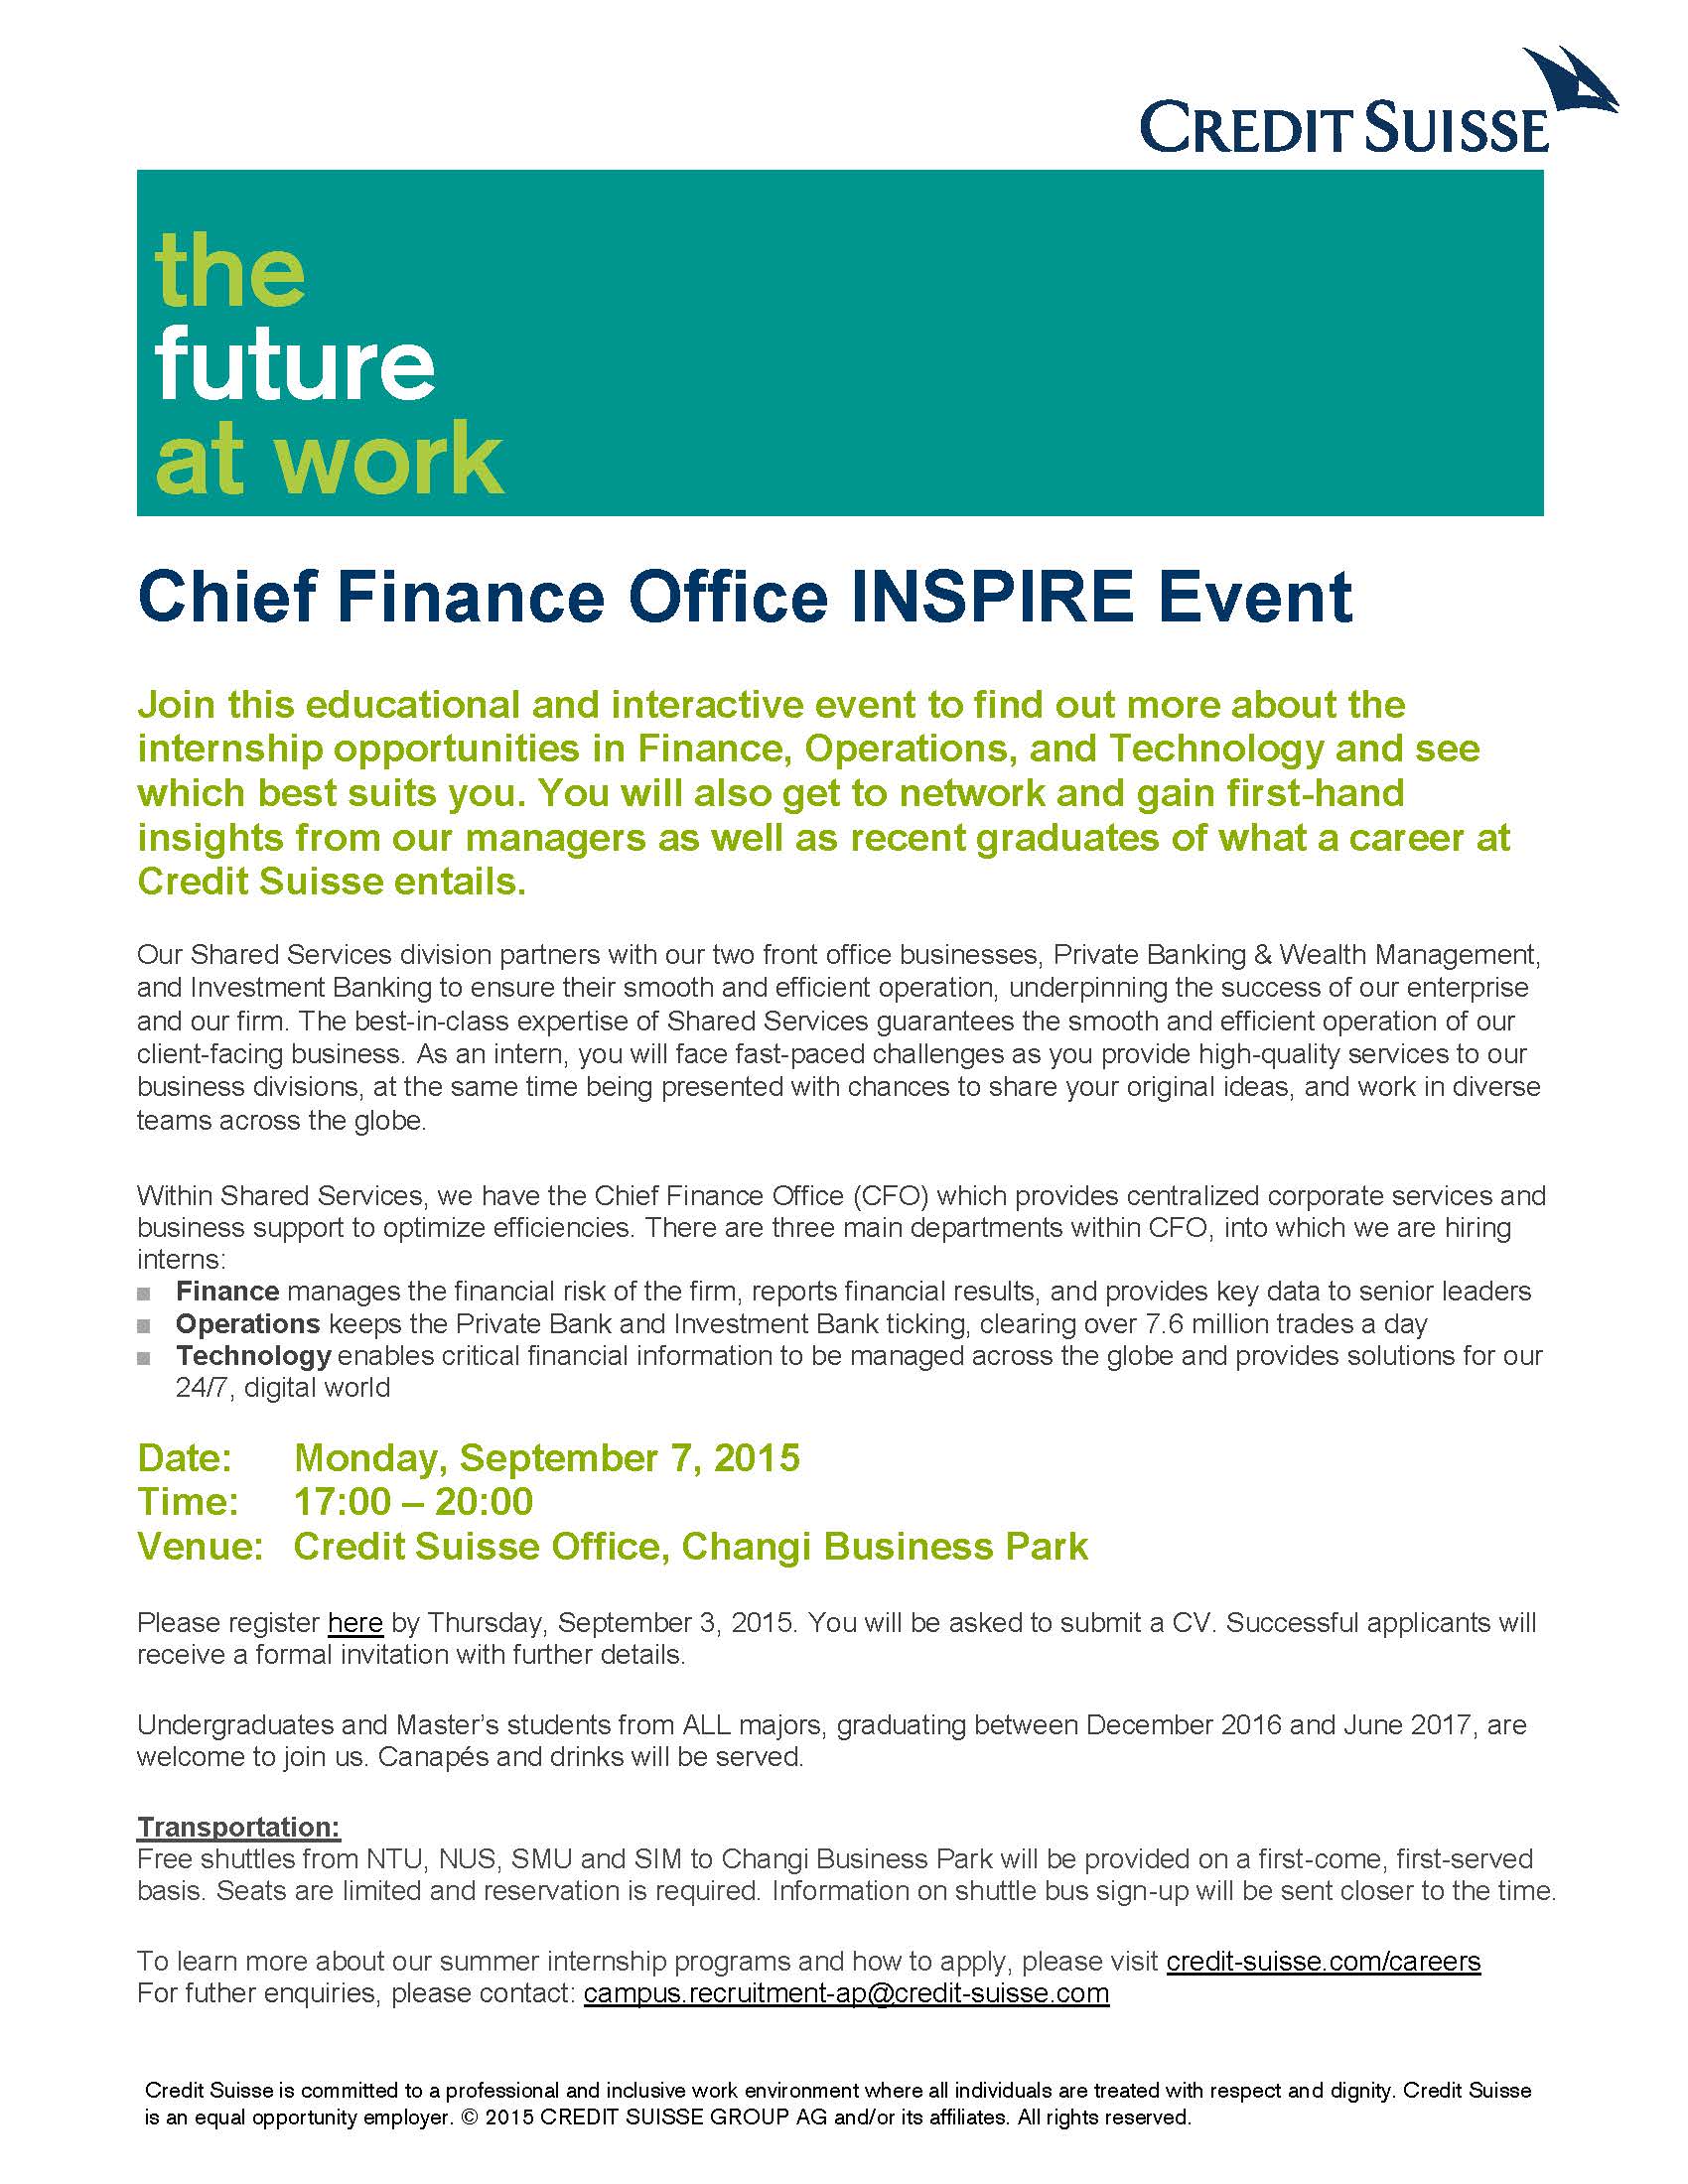 SIGN UP NOW Credit Suisse Chief Finance Office INSPIRE Event -  September 7 2015